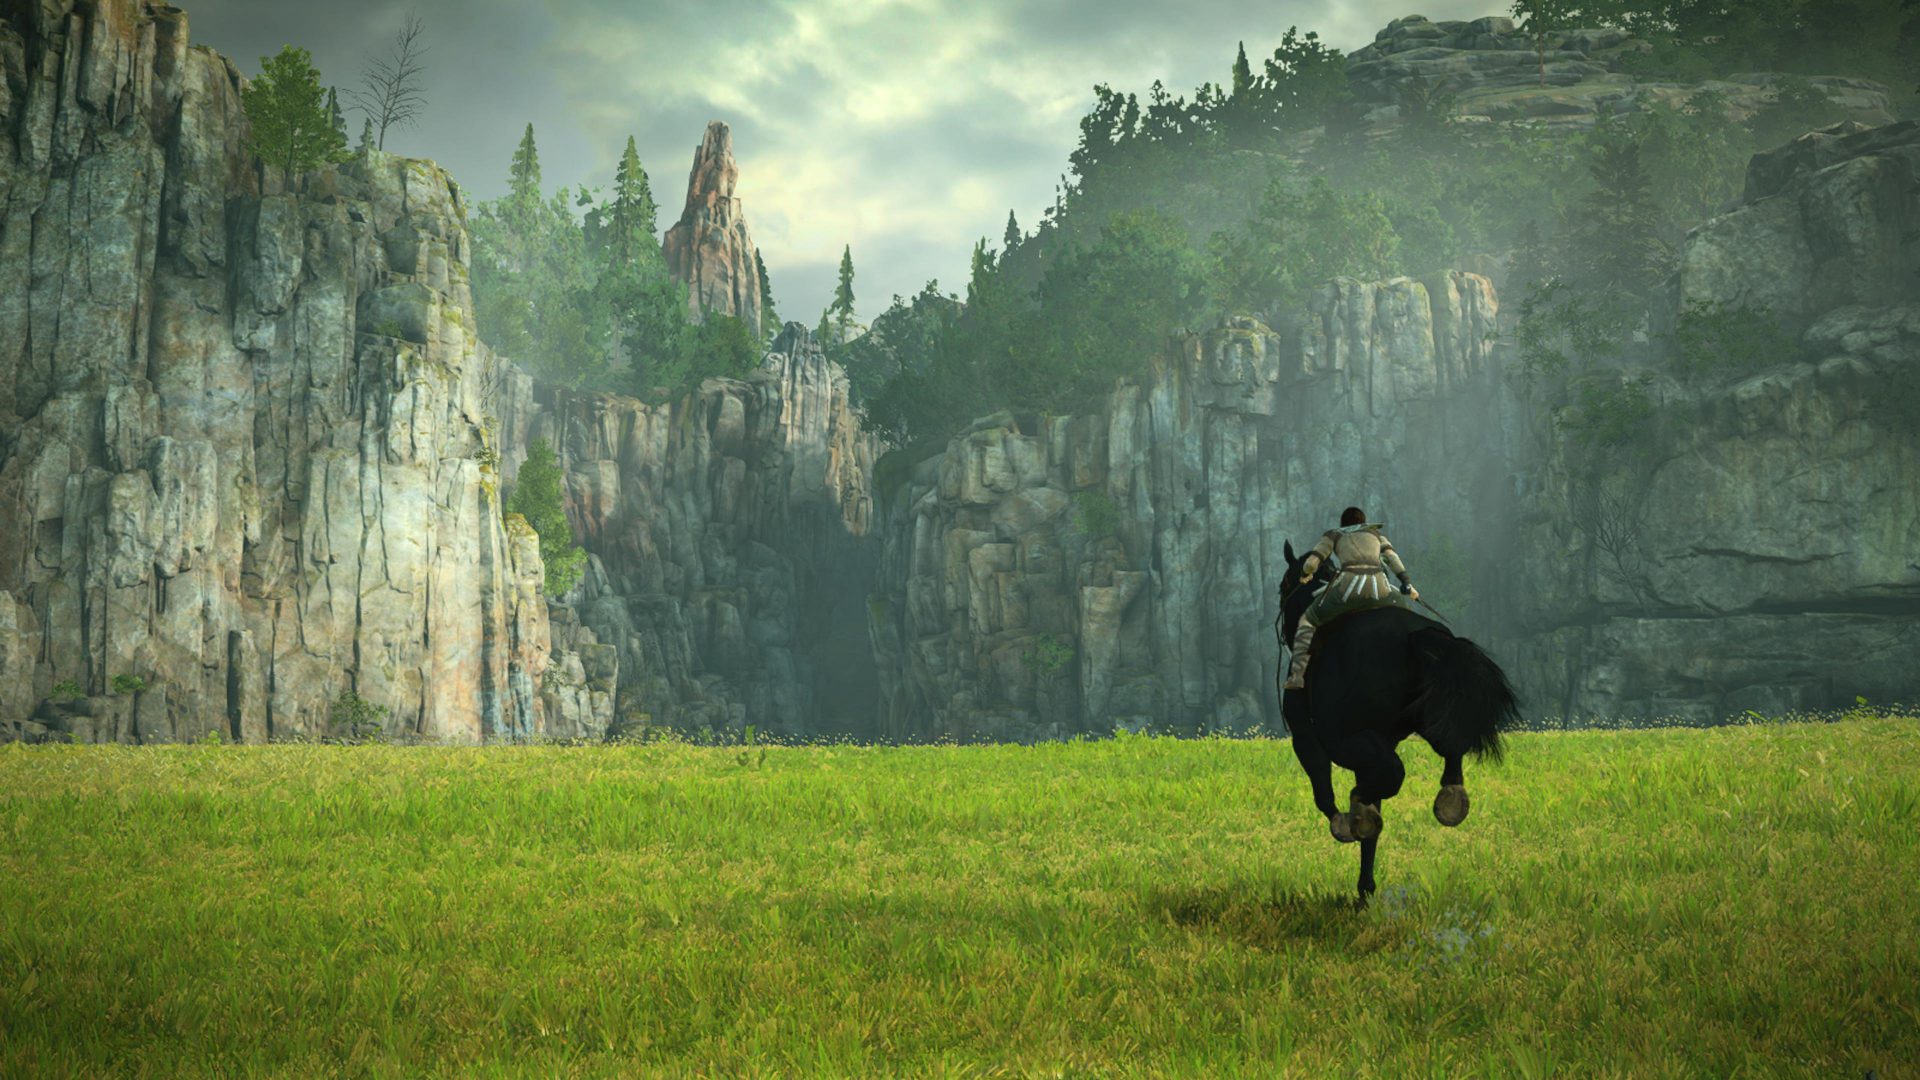 Free HD Game Shadow Of The Colossus Images.  Shadow of the colossus,  Colossus game, Colossus